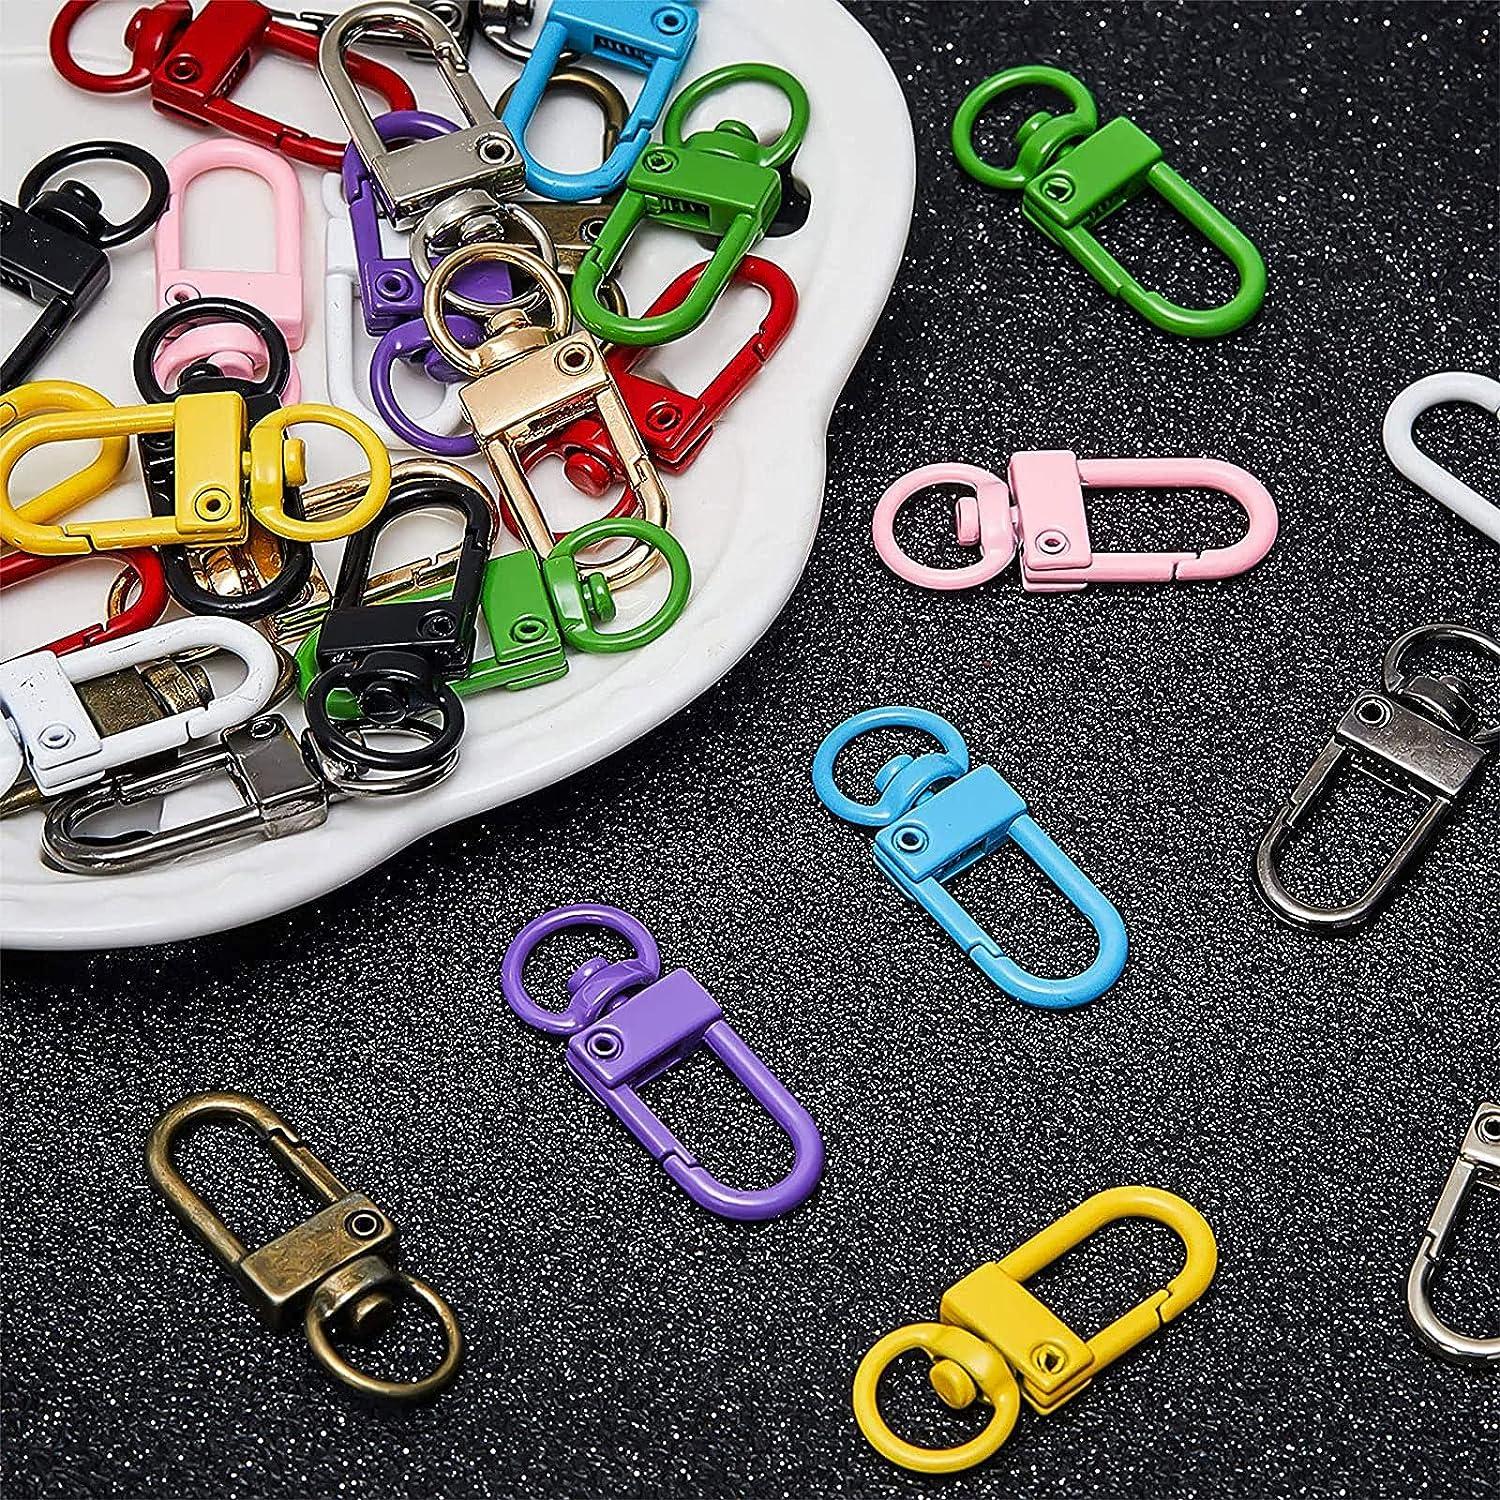  NSBELL 50PCS Colorful Metal Lobster Claw Clasps Swivel Lanyards  Trigger Snap Hooks Strap with Key Rings DIY Accessories for Bag Key Chains  Connector Jewelry Making, 10 Colors